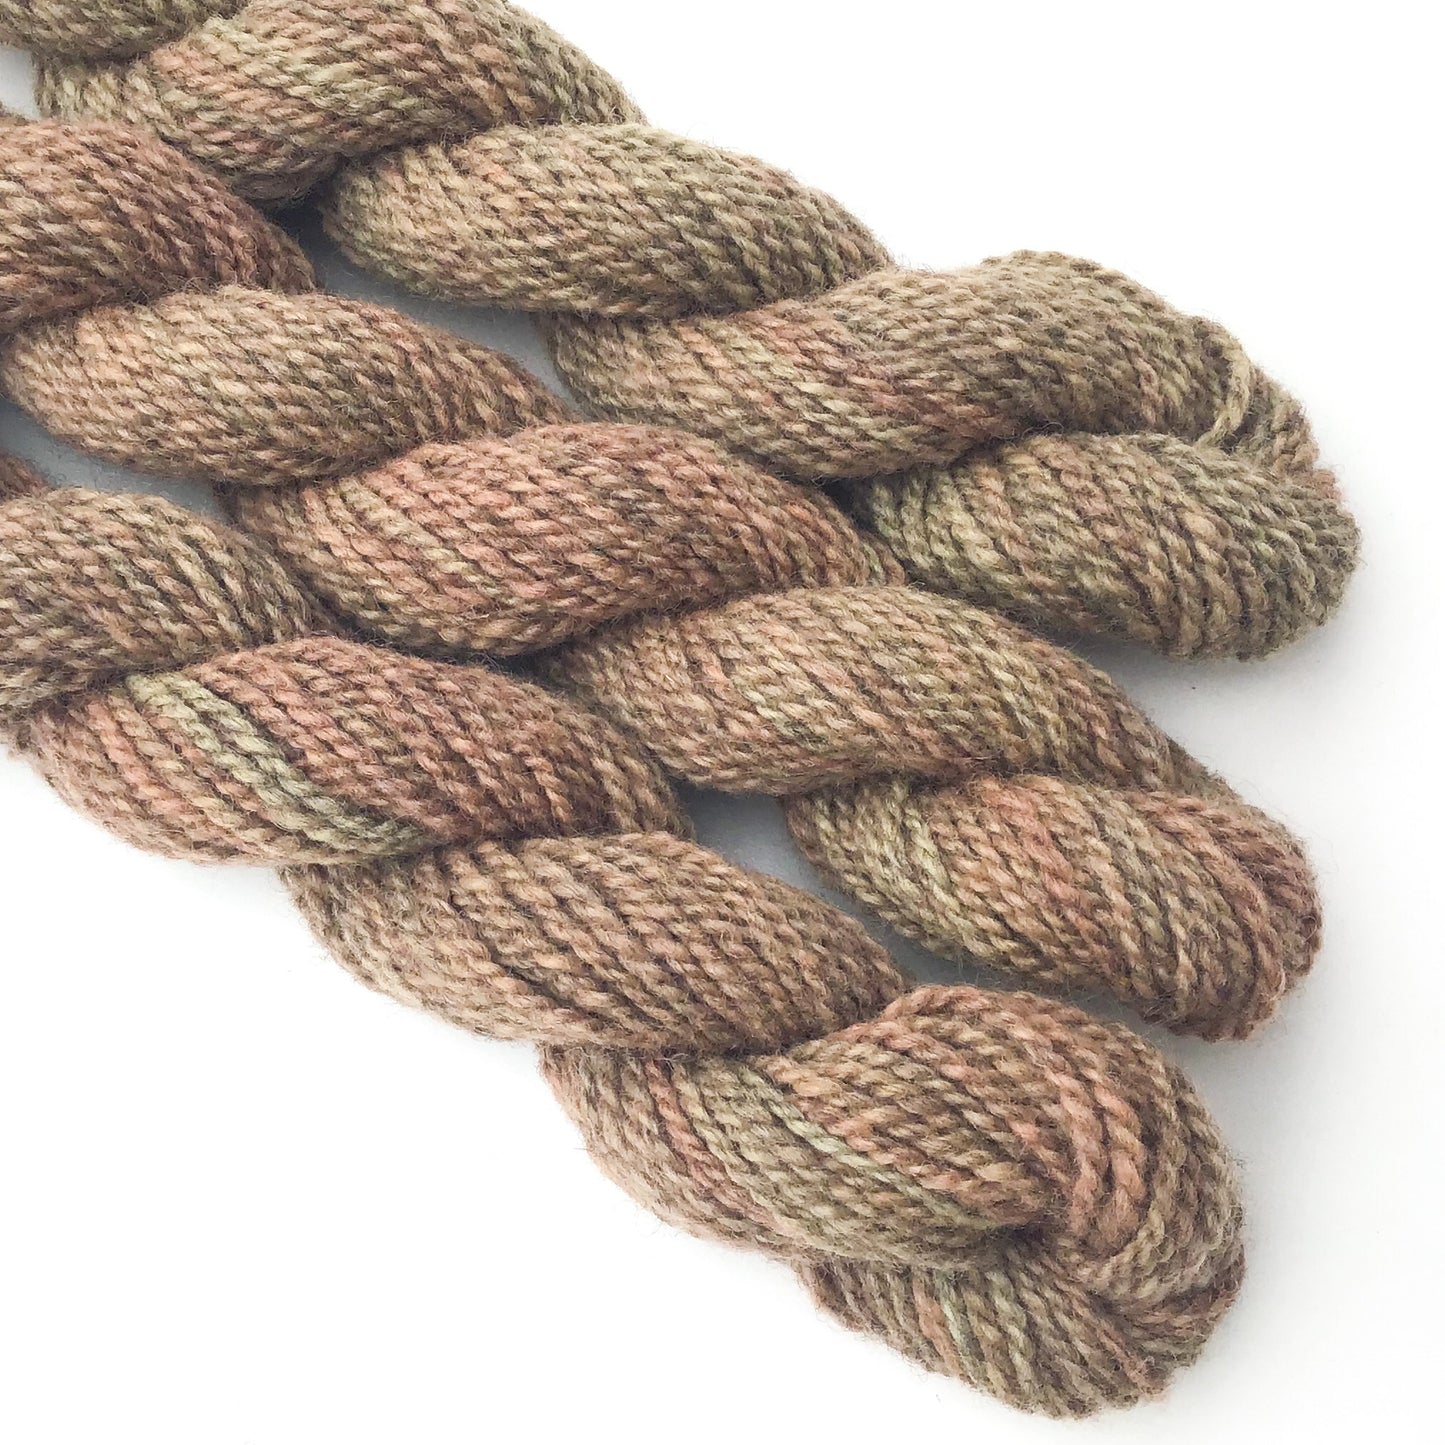 'Pebble' - Worsted Weight - 2ply Hand-dyed Yarn